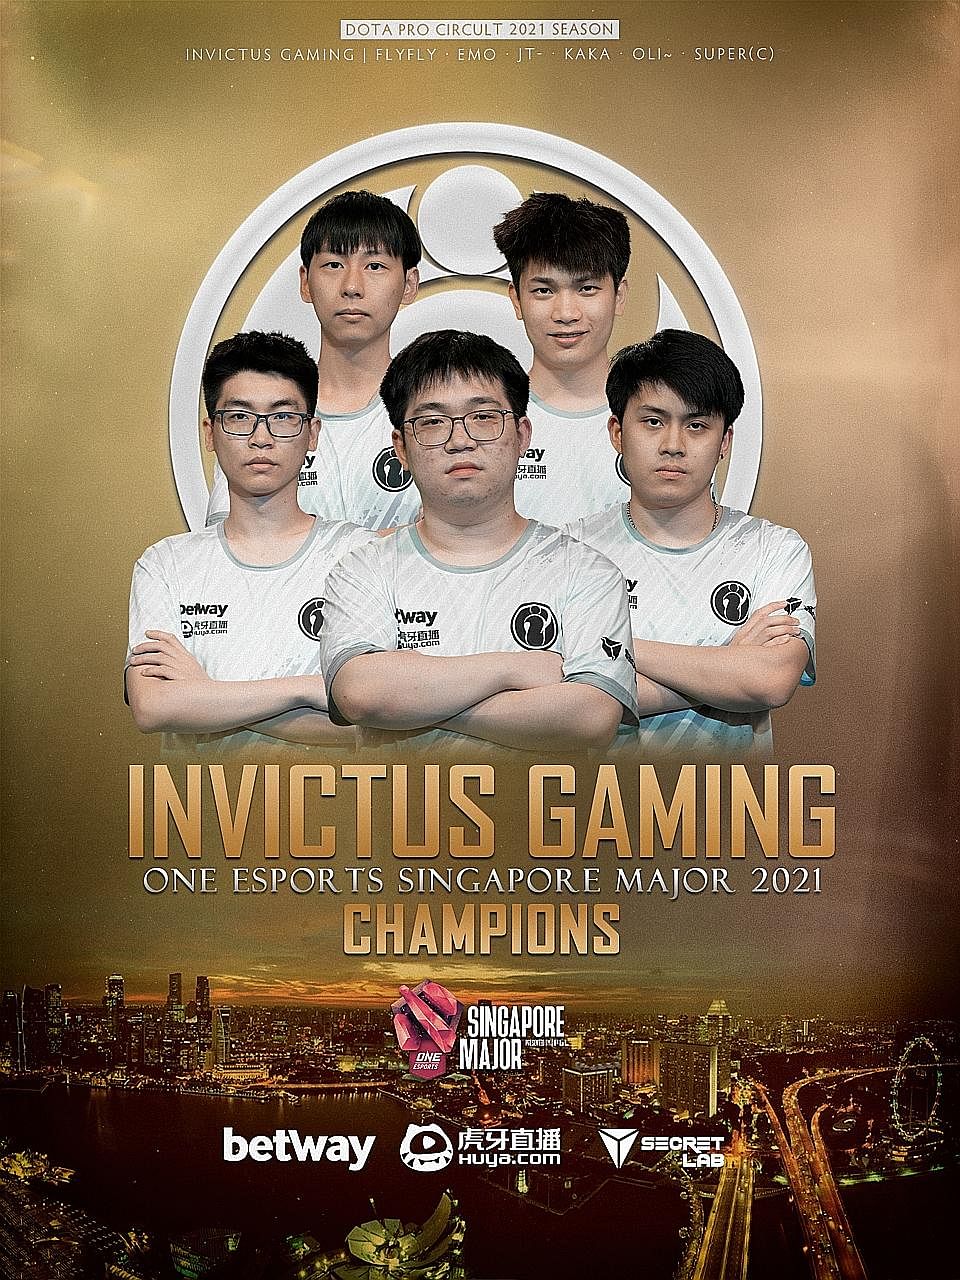 Hu Liangzhi (back row, right) played a big role in Invictus Gaming's 3-2 comeback victory in the grand final of the One Esports Dota 2 Singapore Major yesterday.